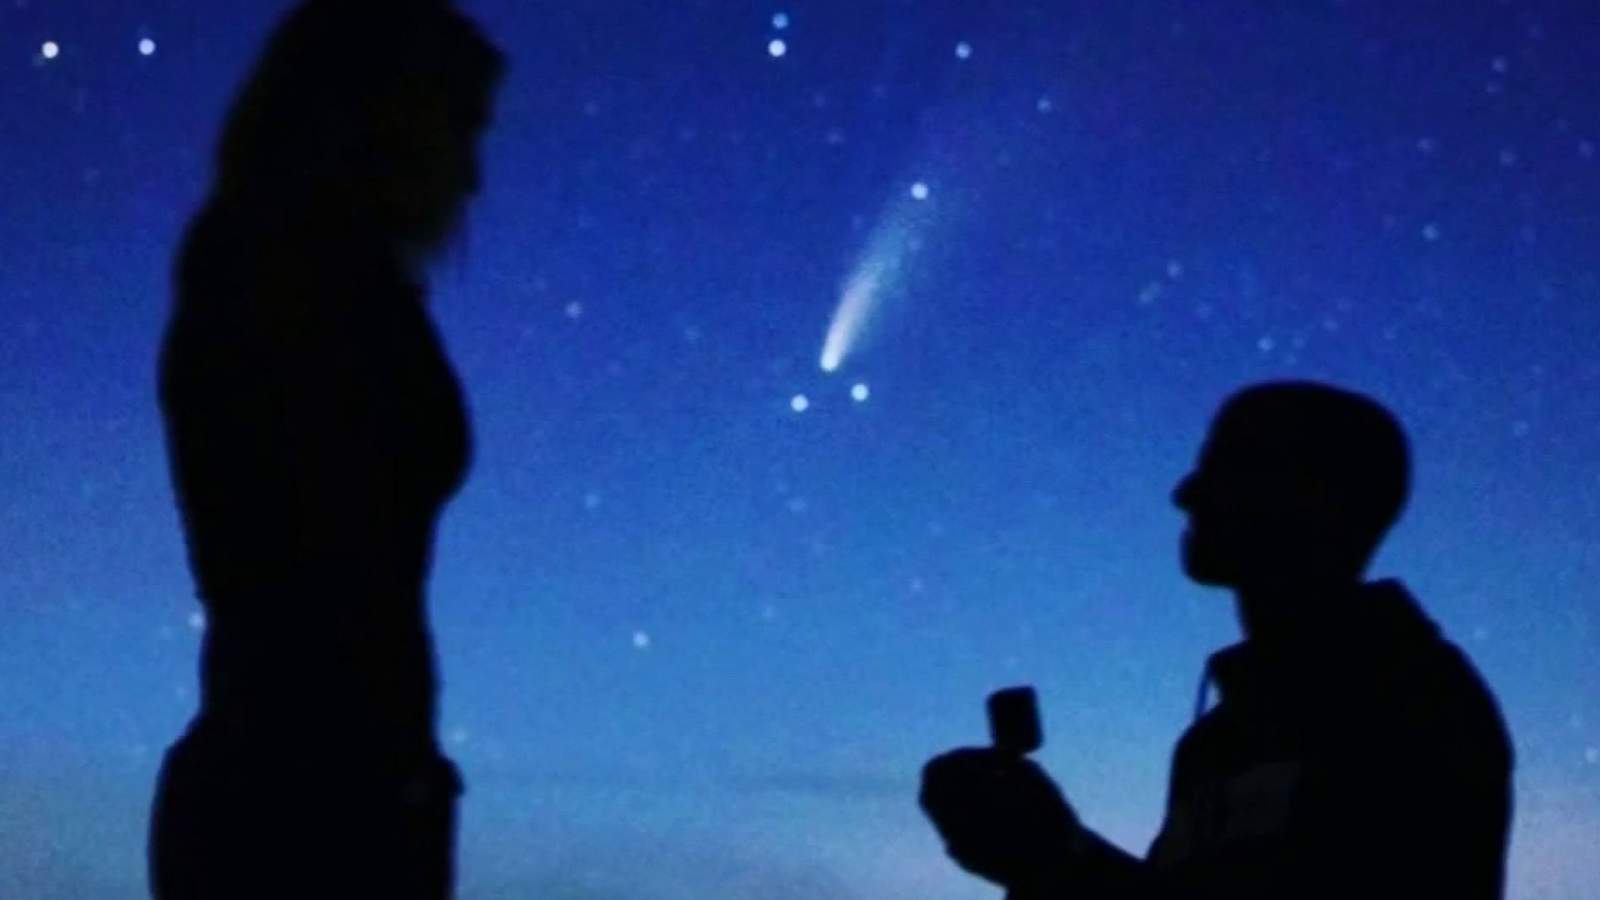 Cosmic proposal: Couple gets engaged under comet